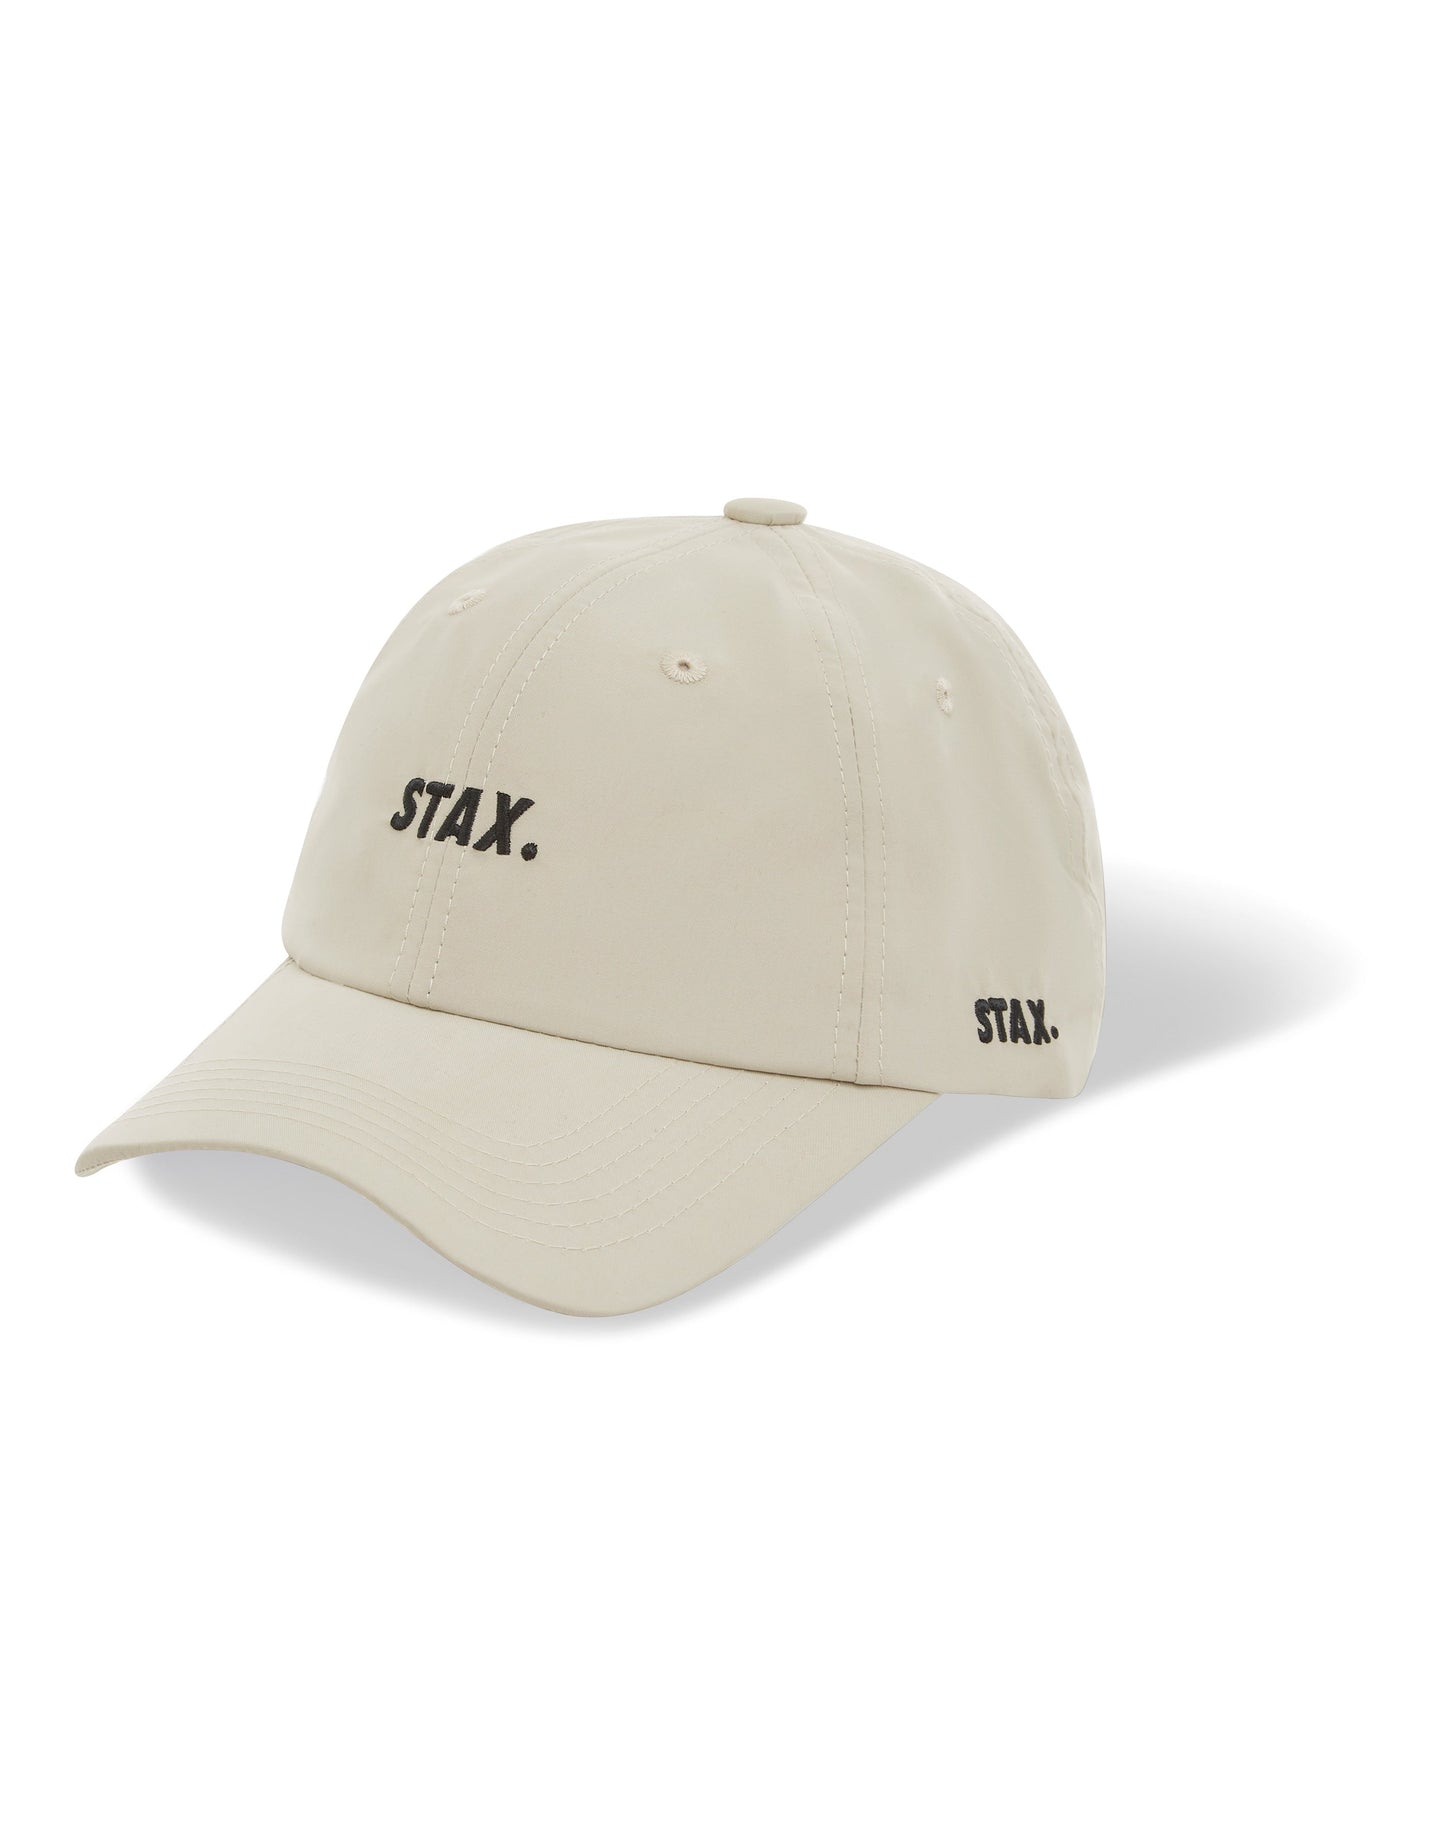 STAX. Official Dad Cap - Sand